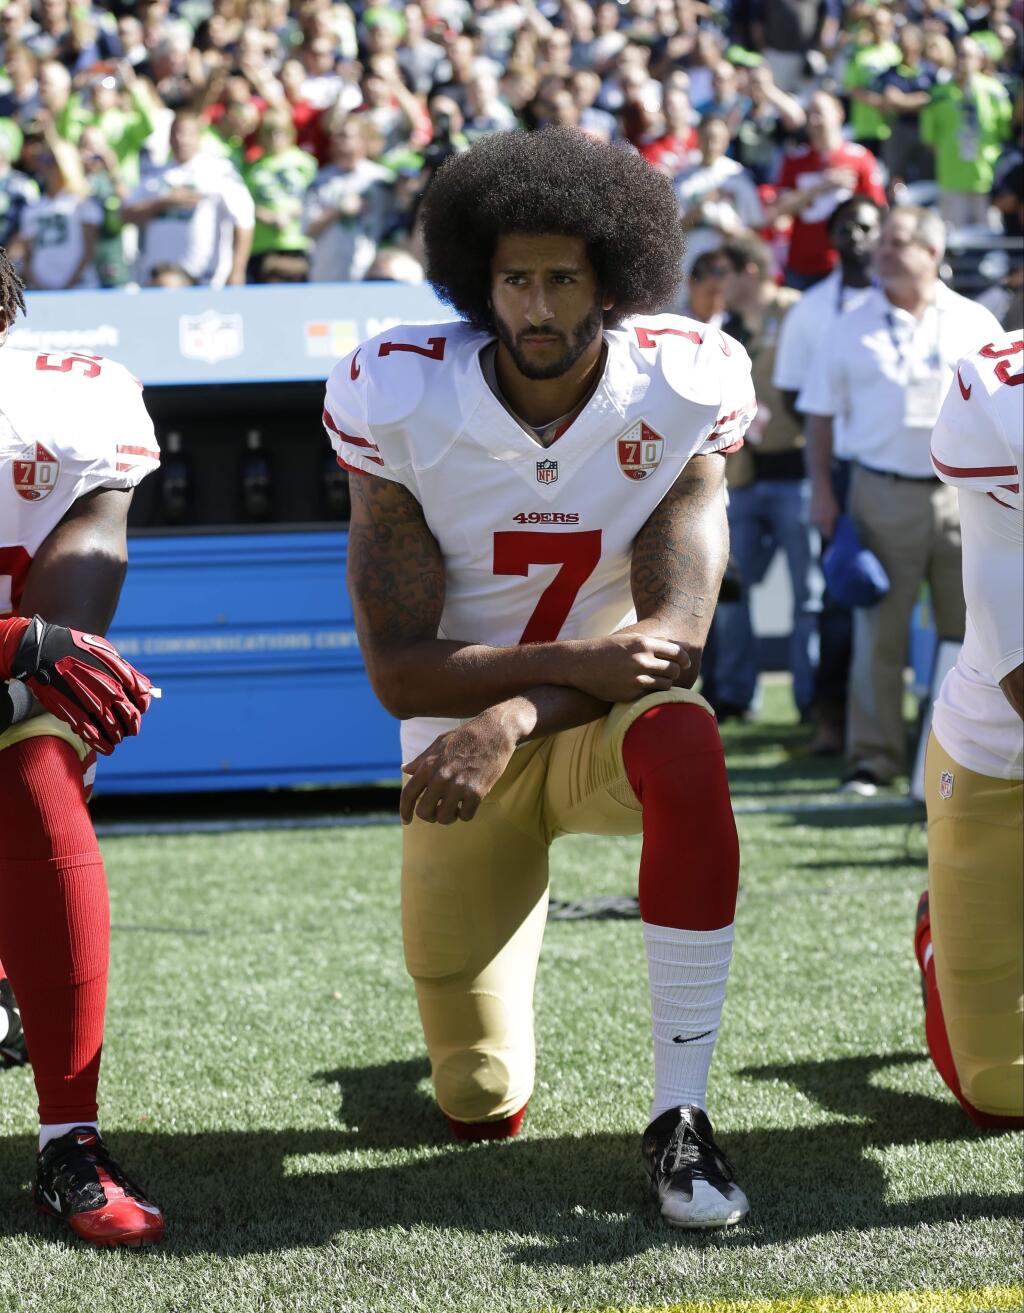 In this Sept. 25, 2016, file photo, the San Francisco 49ers' Colin Kaepernick kneels during the national anthem before a game against the Seattle Seahawks, in Seattle. (AP Photo/Ted S. Warren, File)